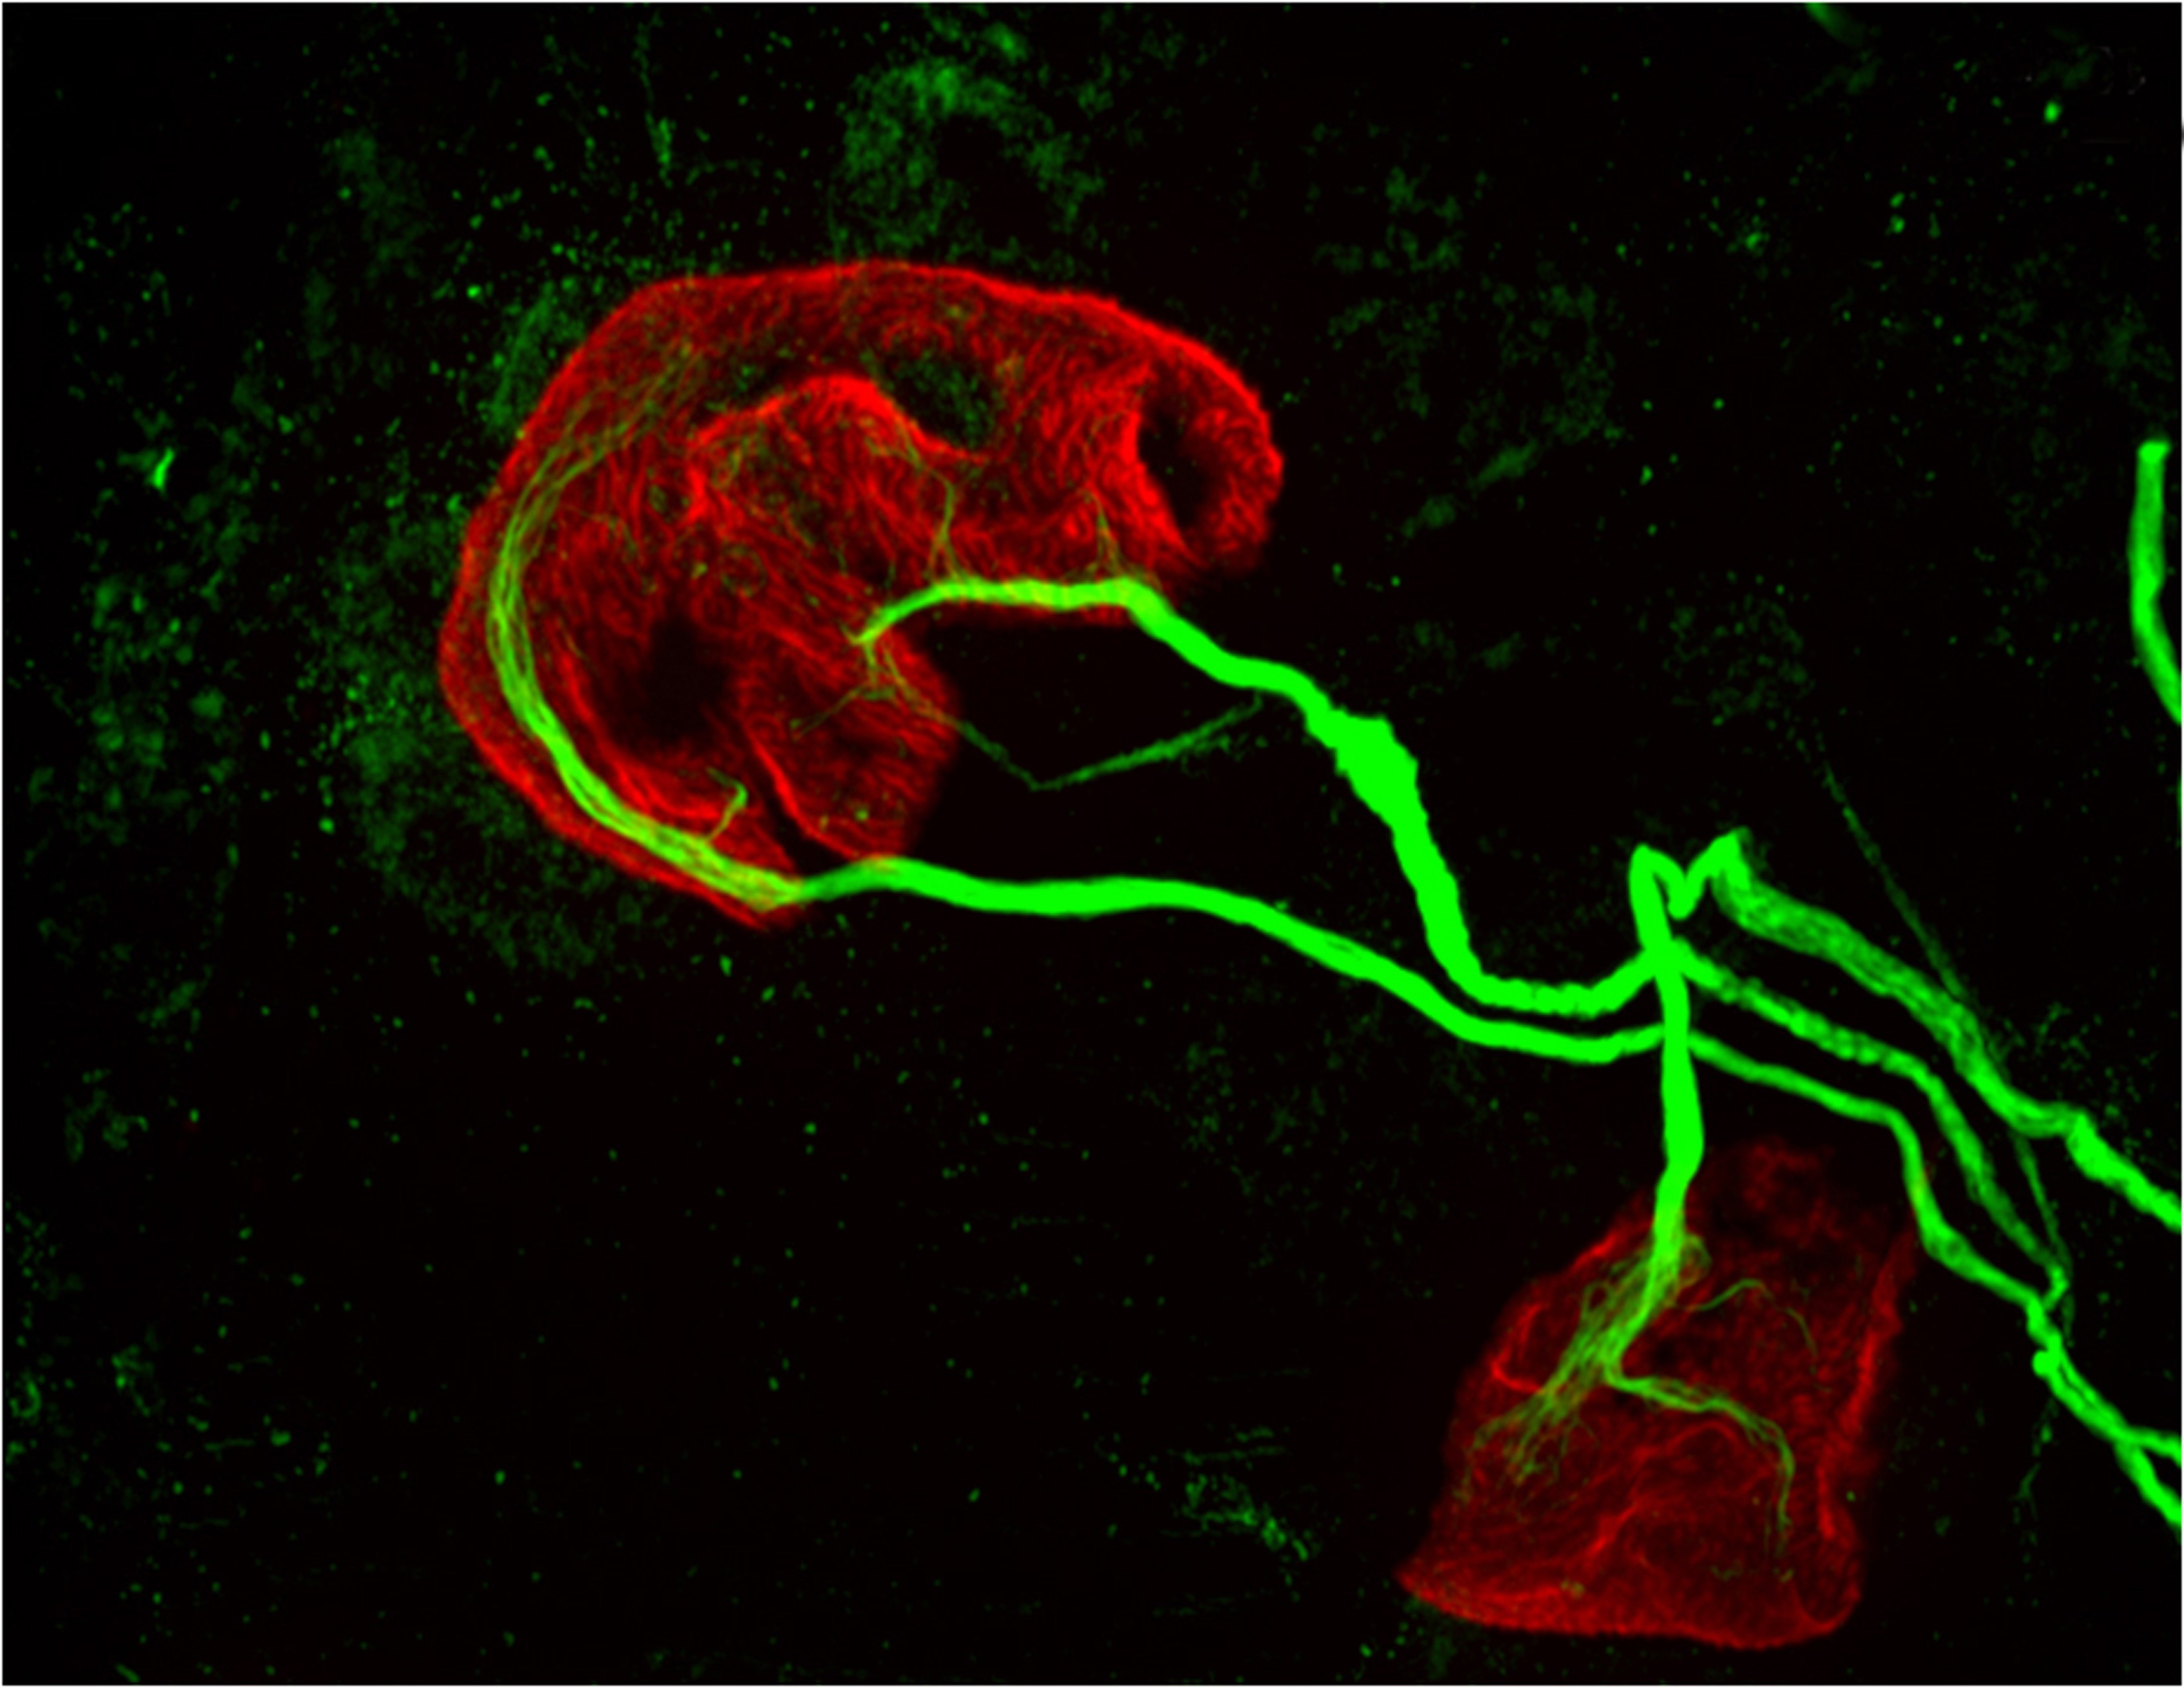 two motor neurons (green) connected to a single muscle fiber (red)